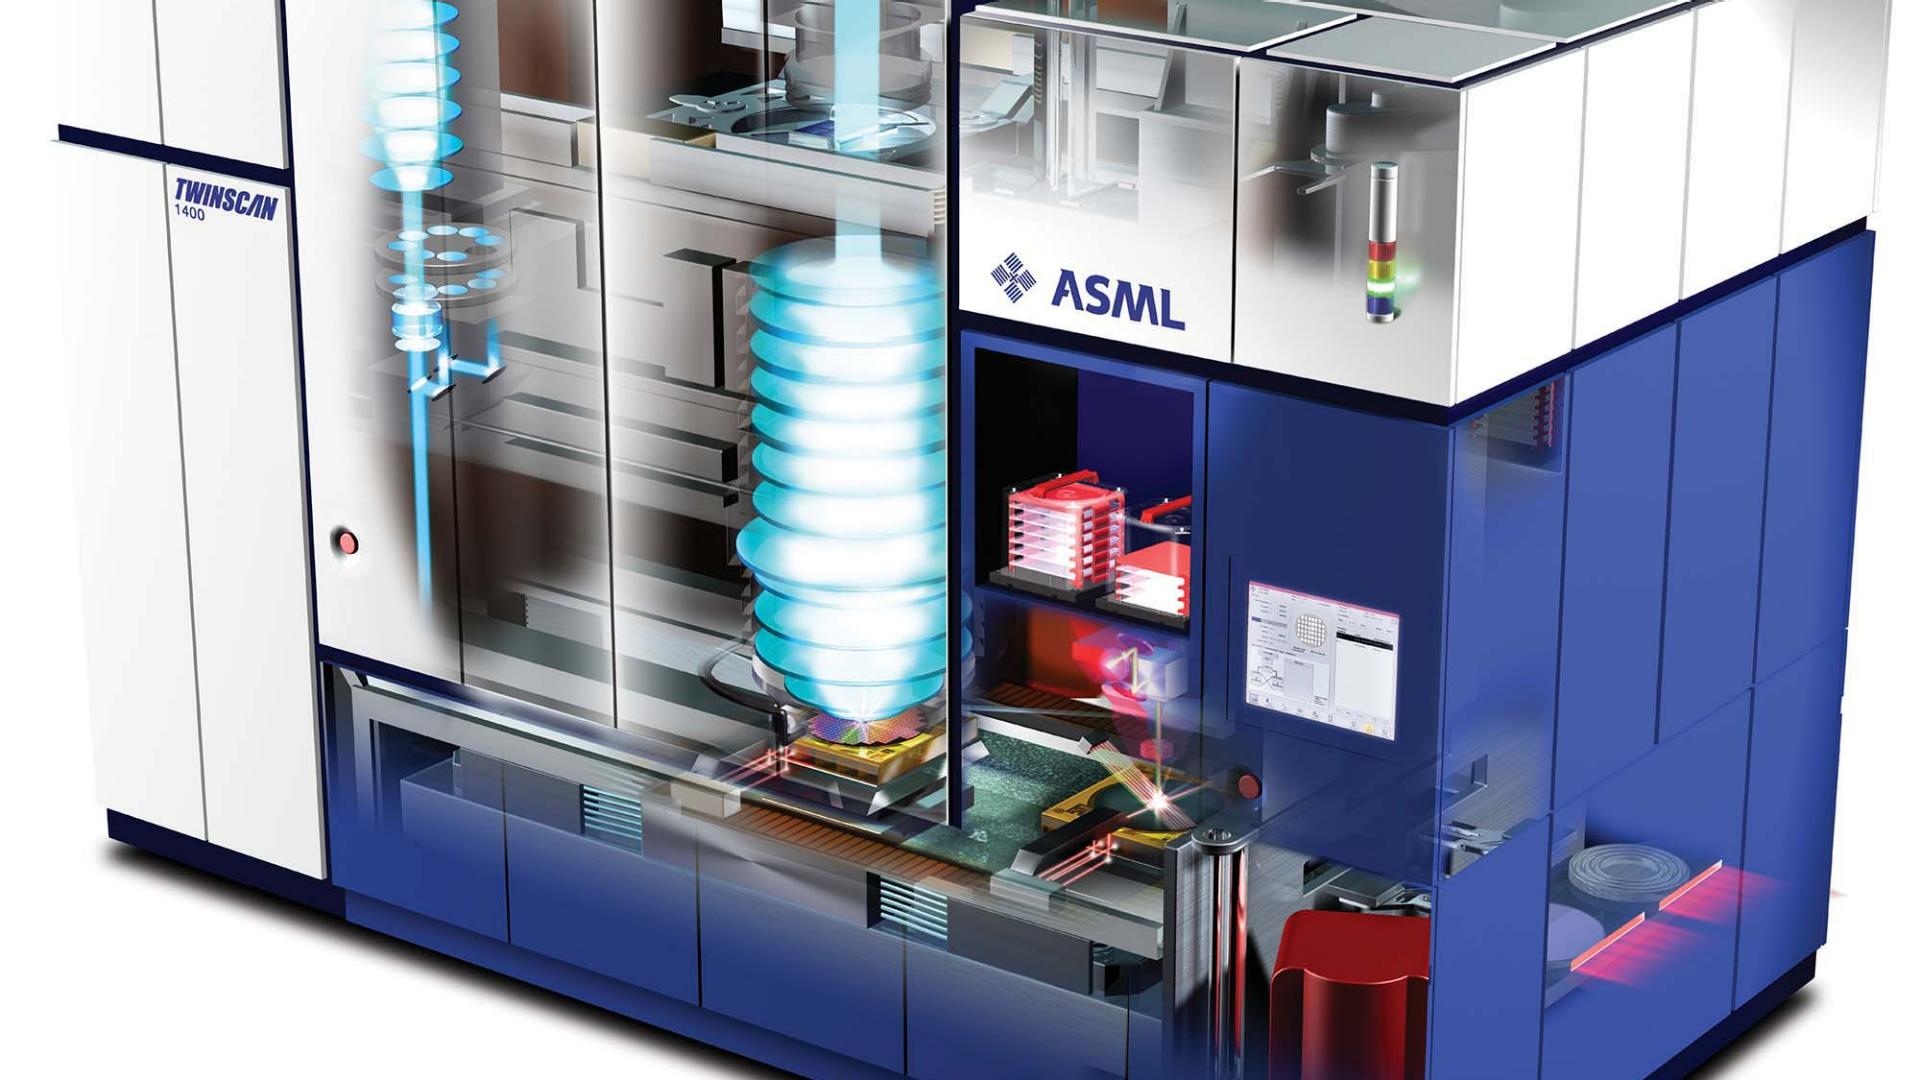 Insights into machine from ASML 